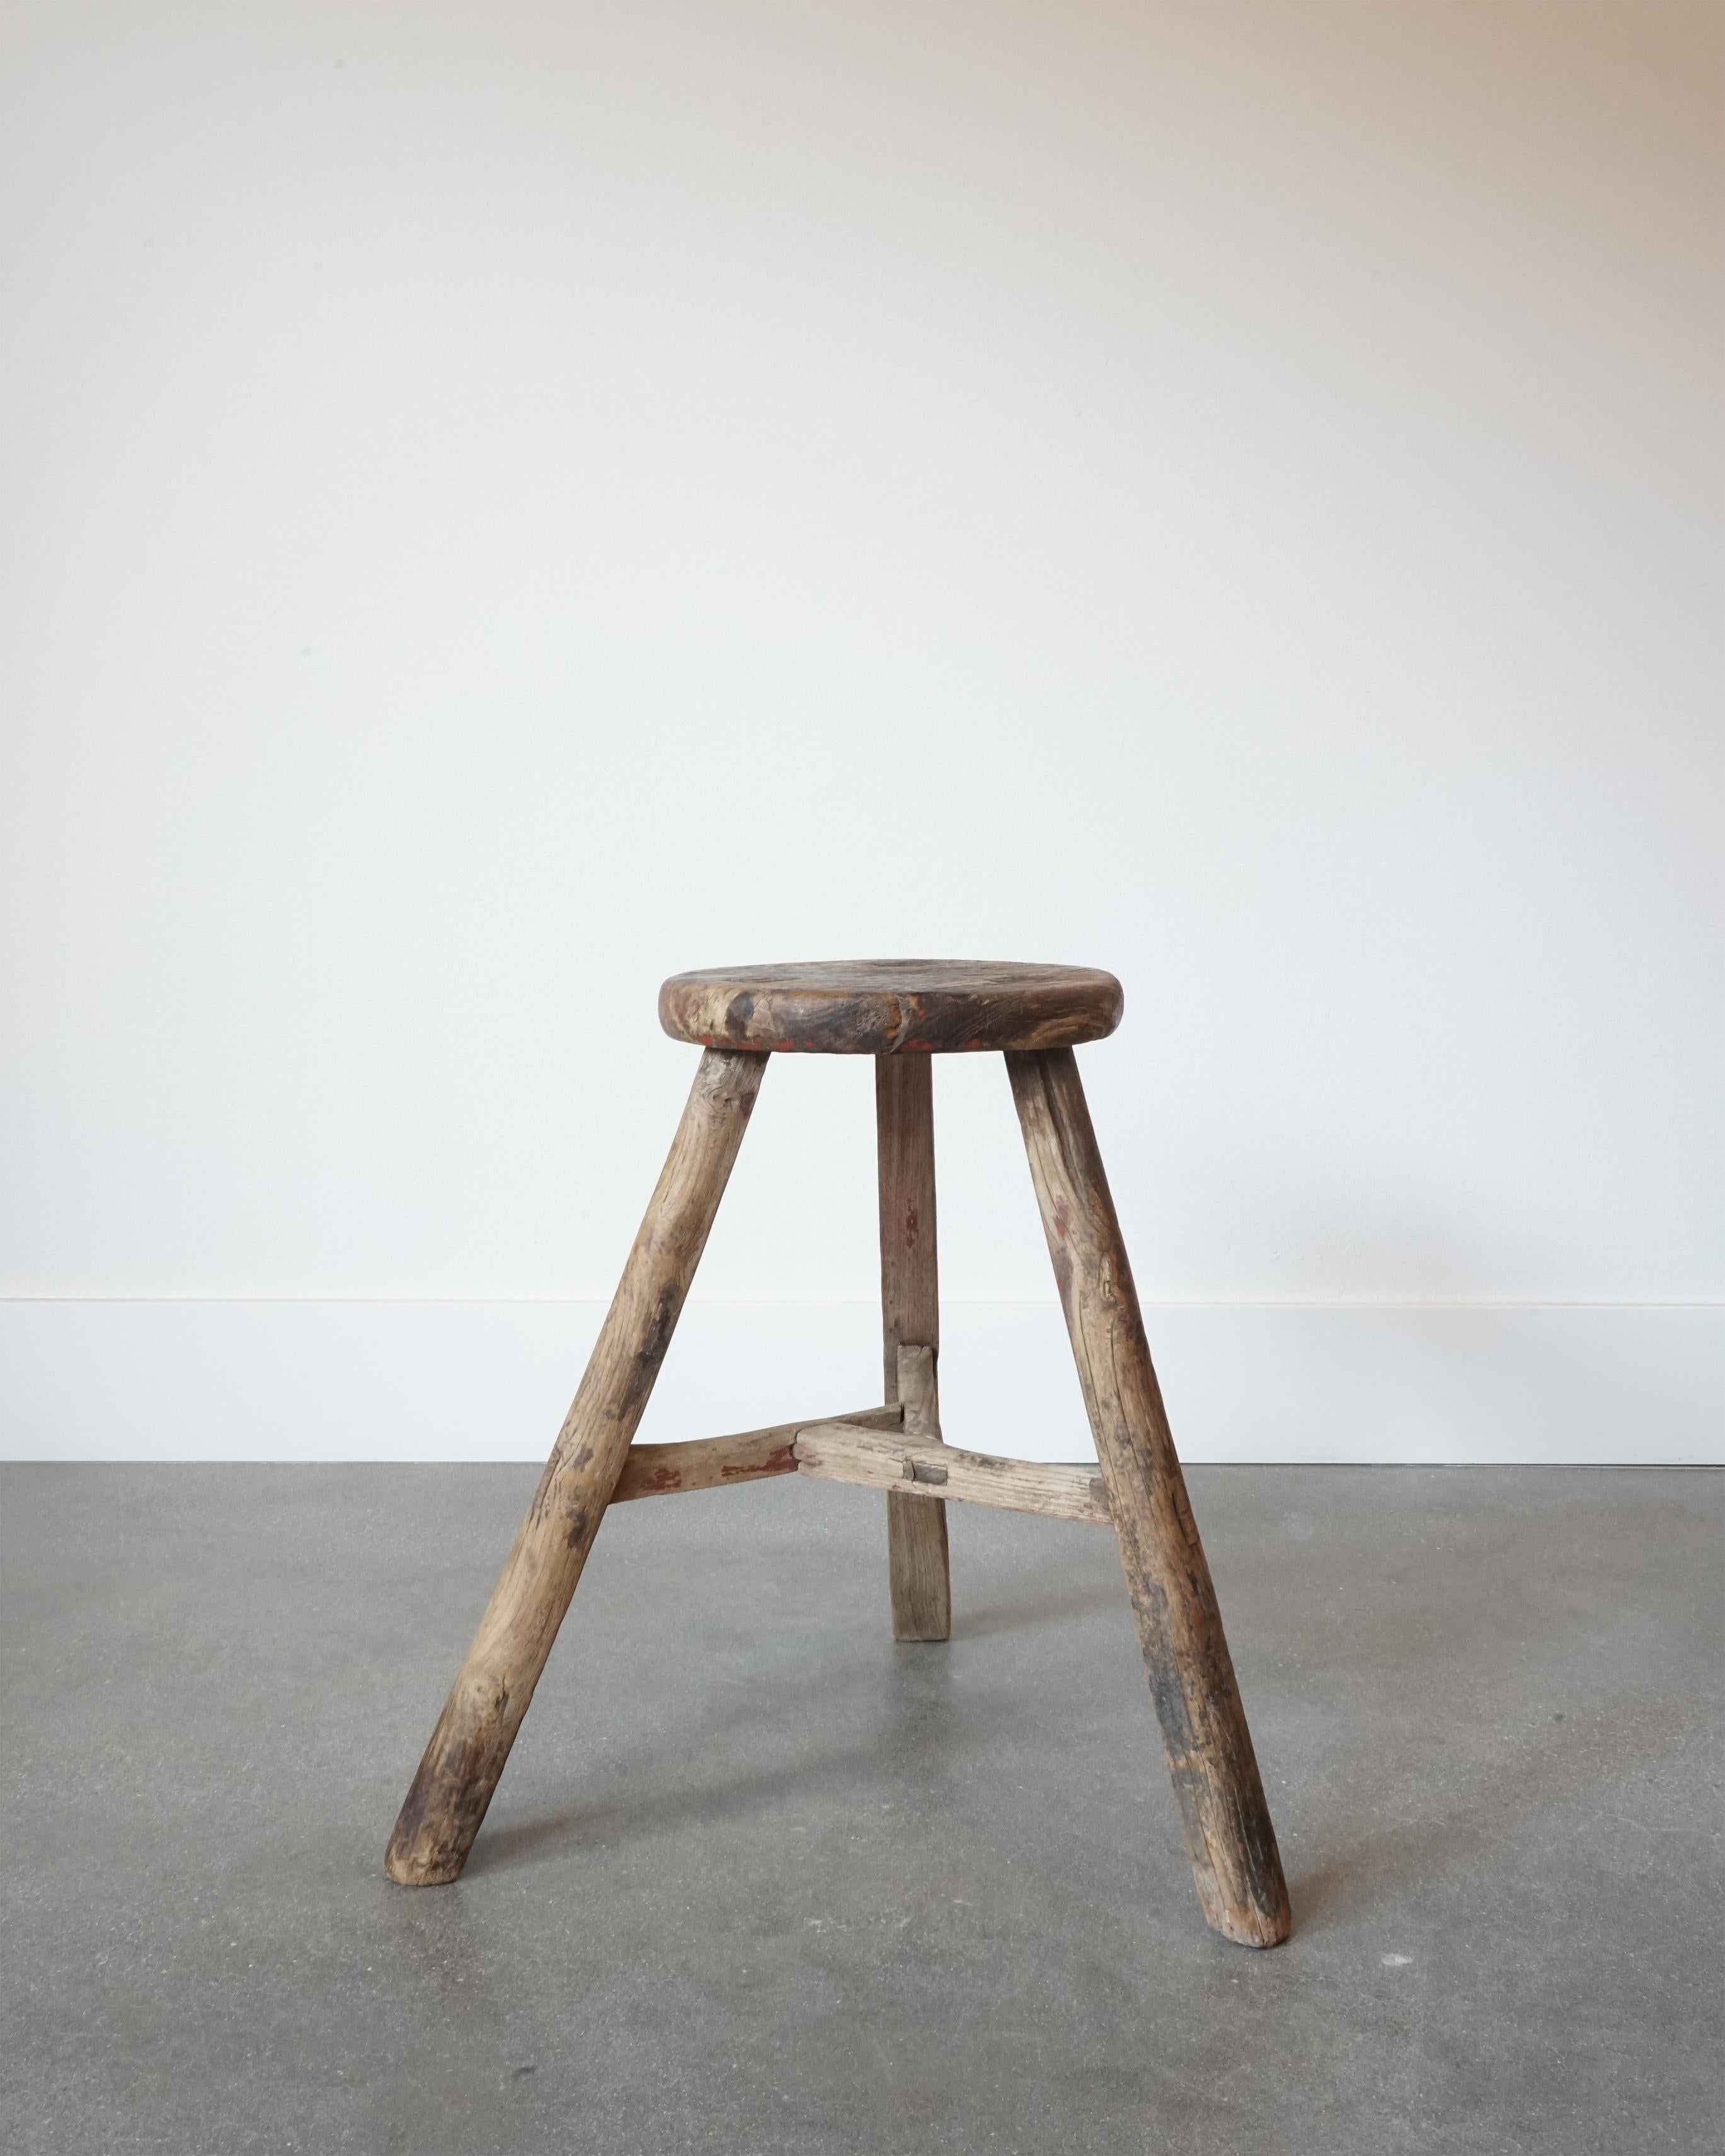 Antique 19th century primitive tripod stool.

Beautiful age showing loss of paint and excellent wear throughout. Sprayed legs with pin and grove construction. The stool is very solid with no wobble, major cracks, etc. 

Excellent side table,